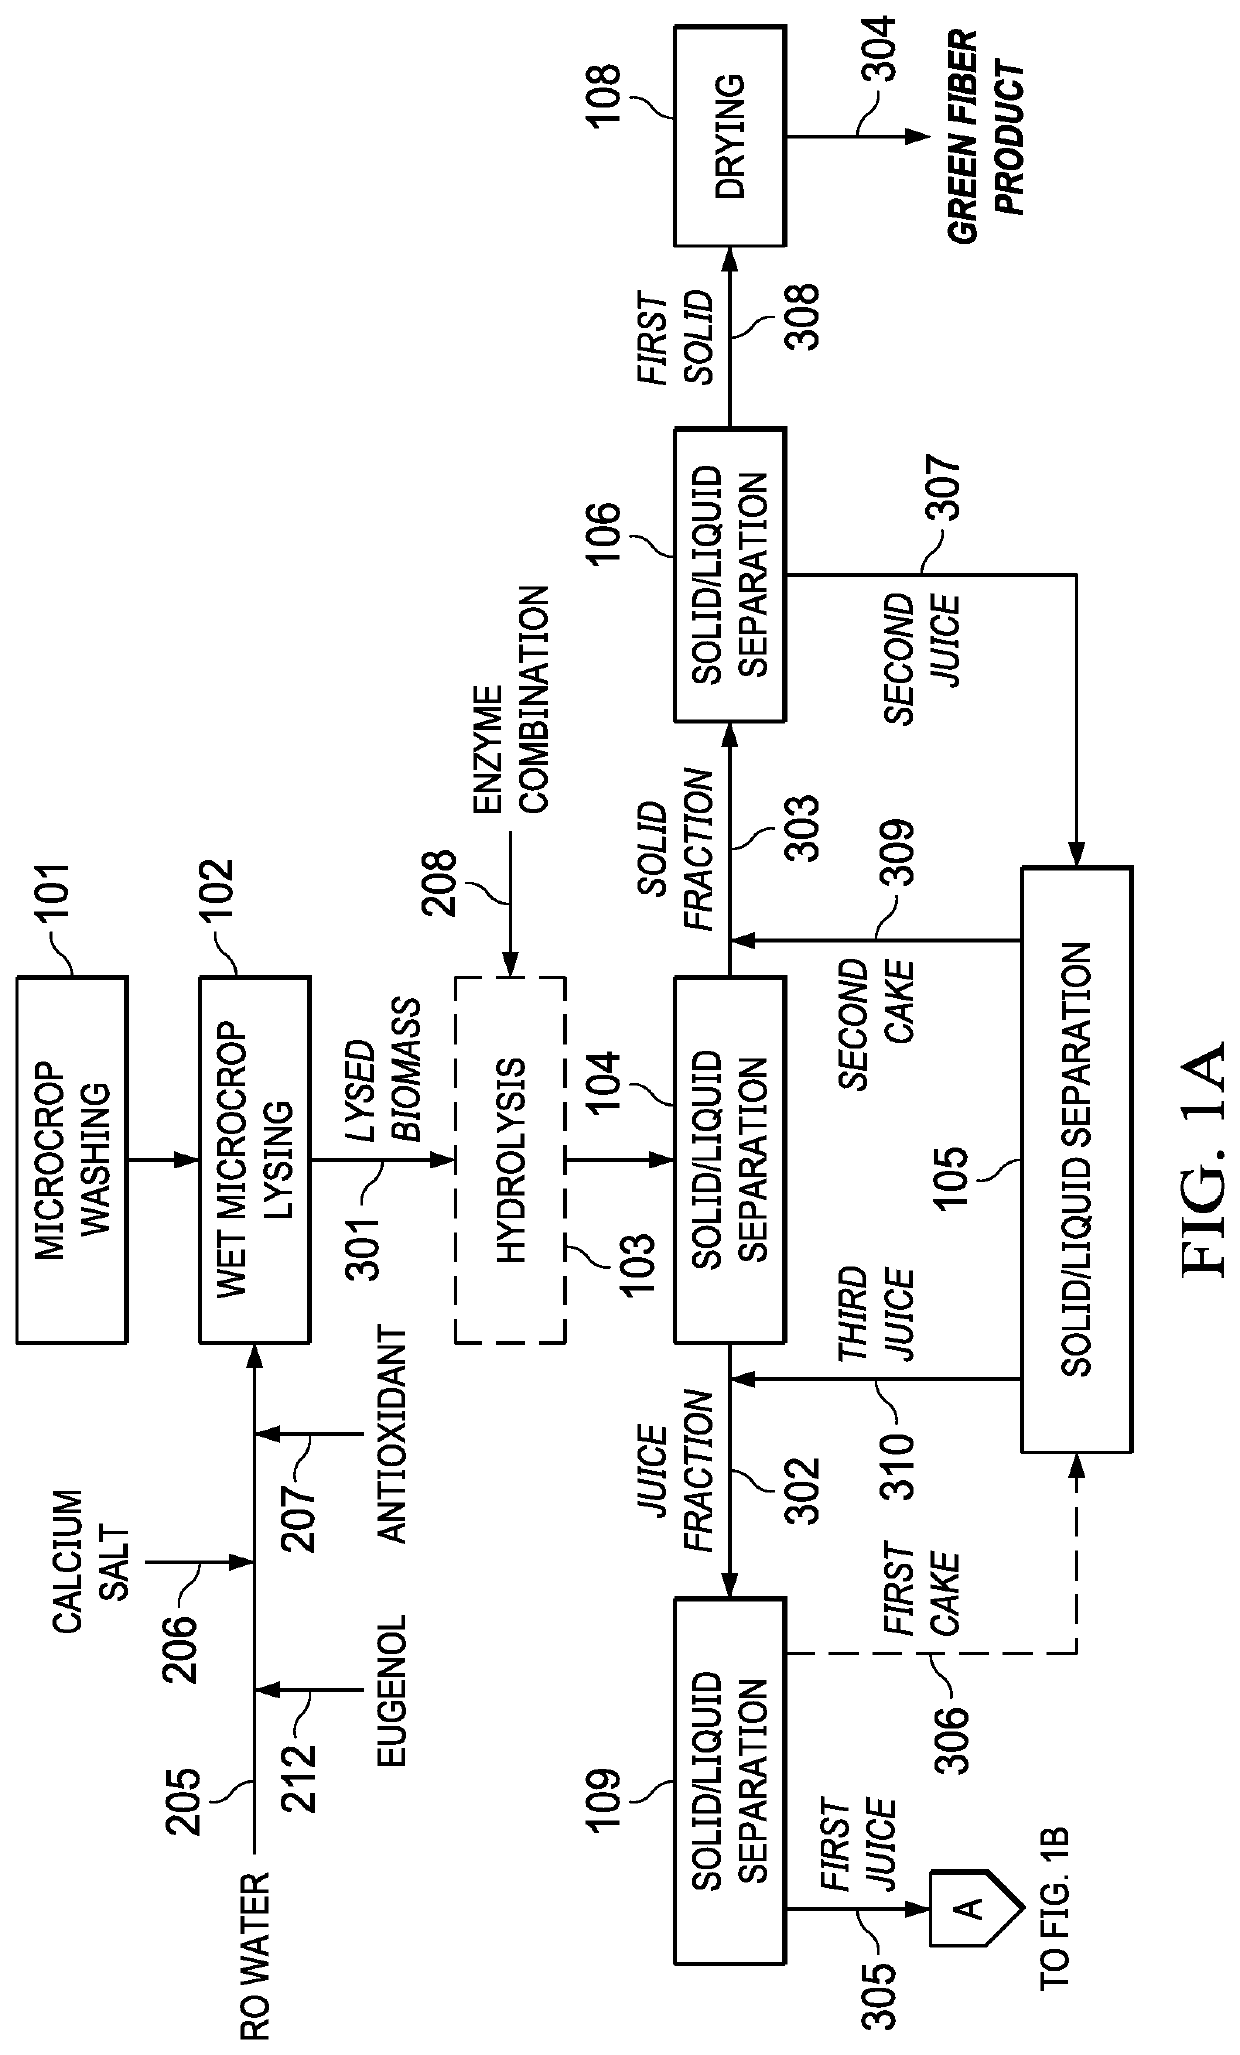 Methods and systems for processing a microcrop to generate nutritionally dense consumer products